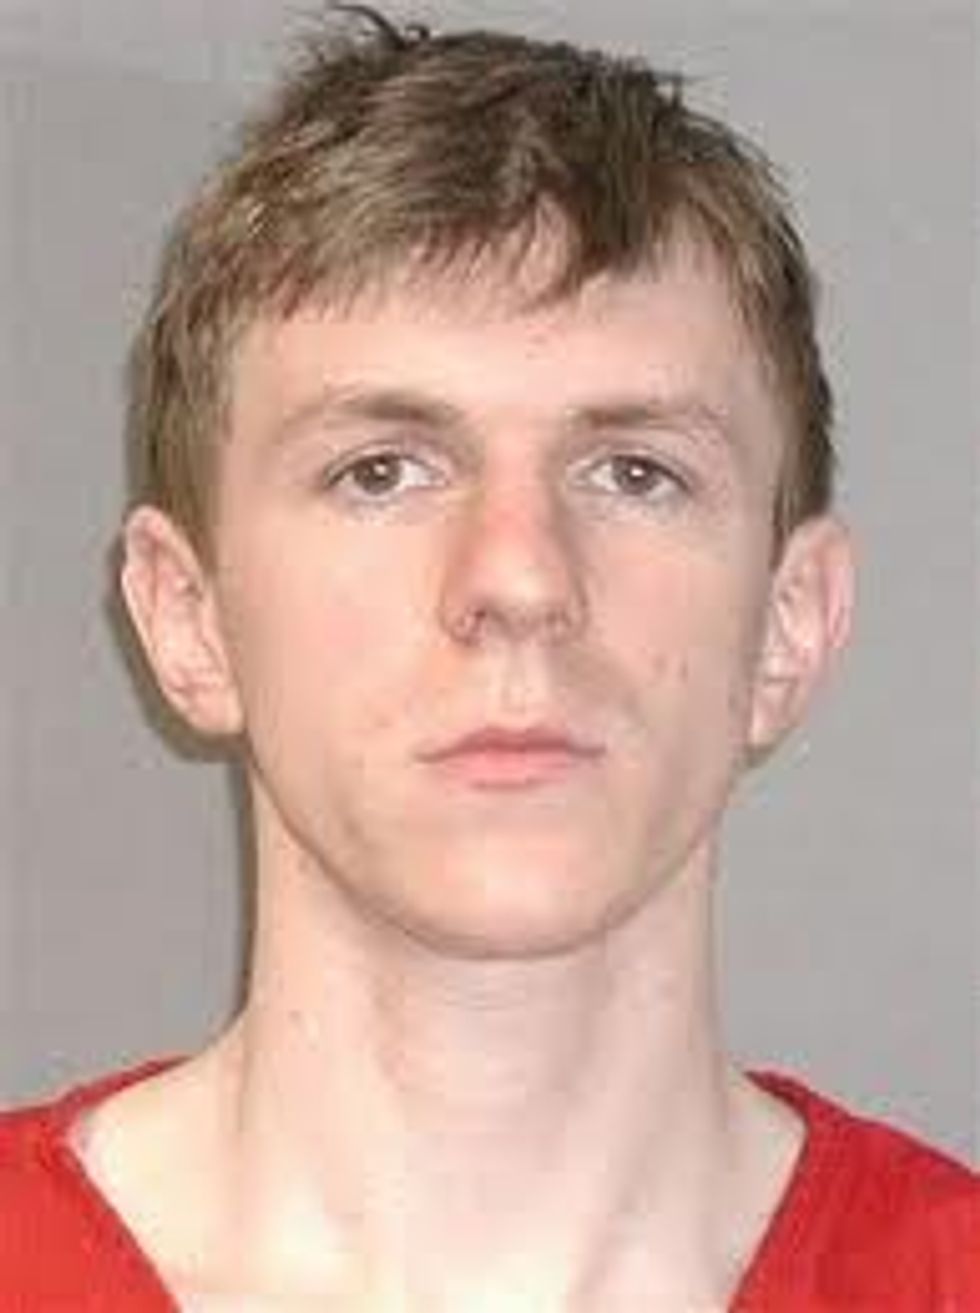 Misunderstood Gentleman James O'Keefe Sues Former 'Accomplice' for Raping His Computer